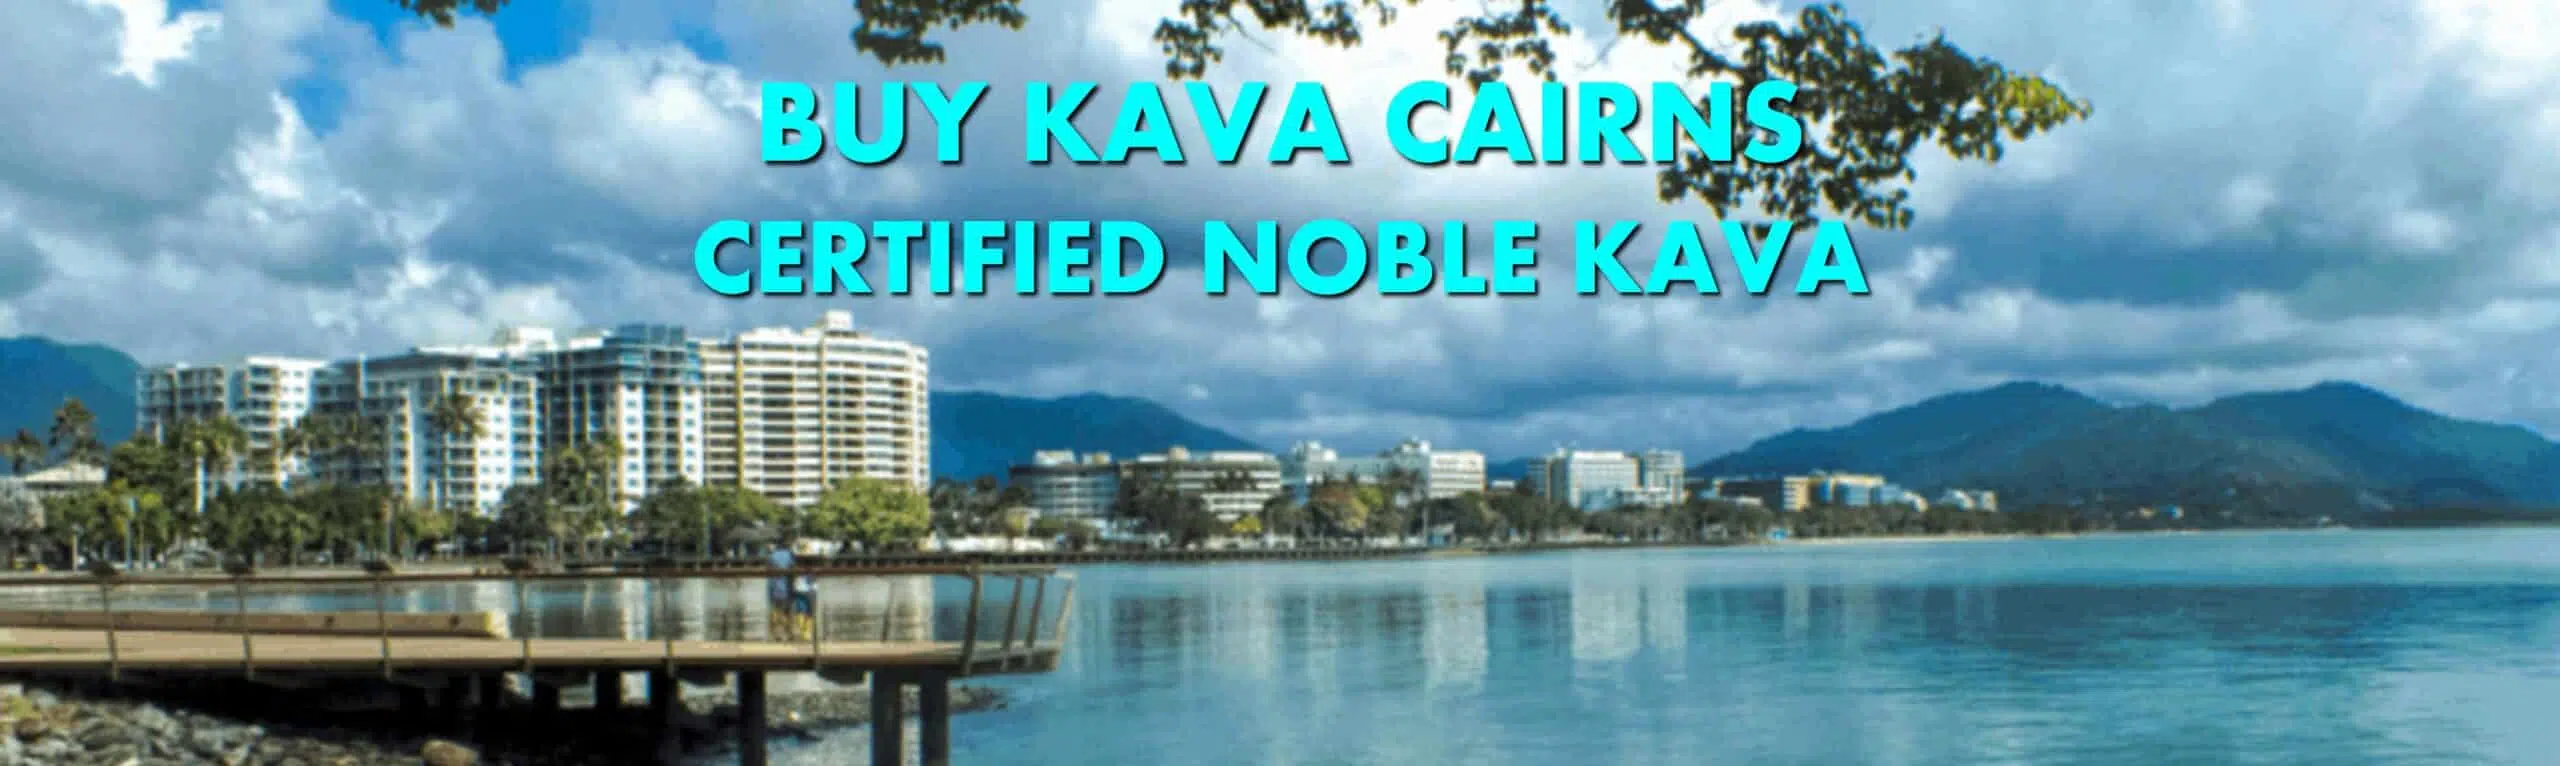 Waterfront in Cairns Queensland with caption Buy Kava Cairns Certified Noble Kava